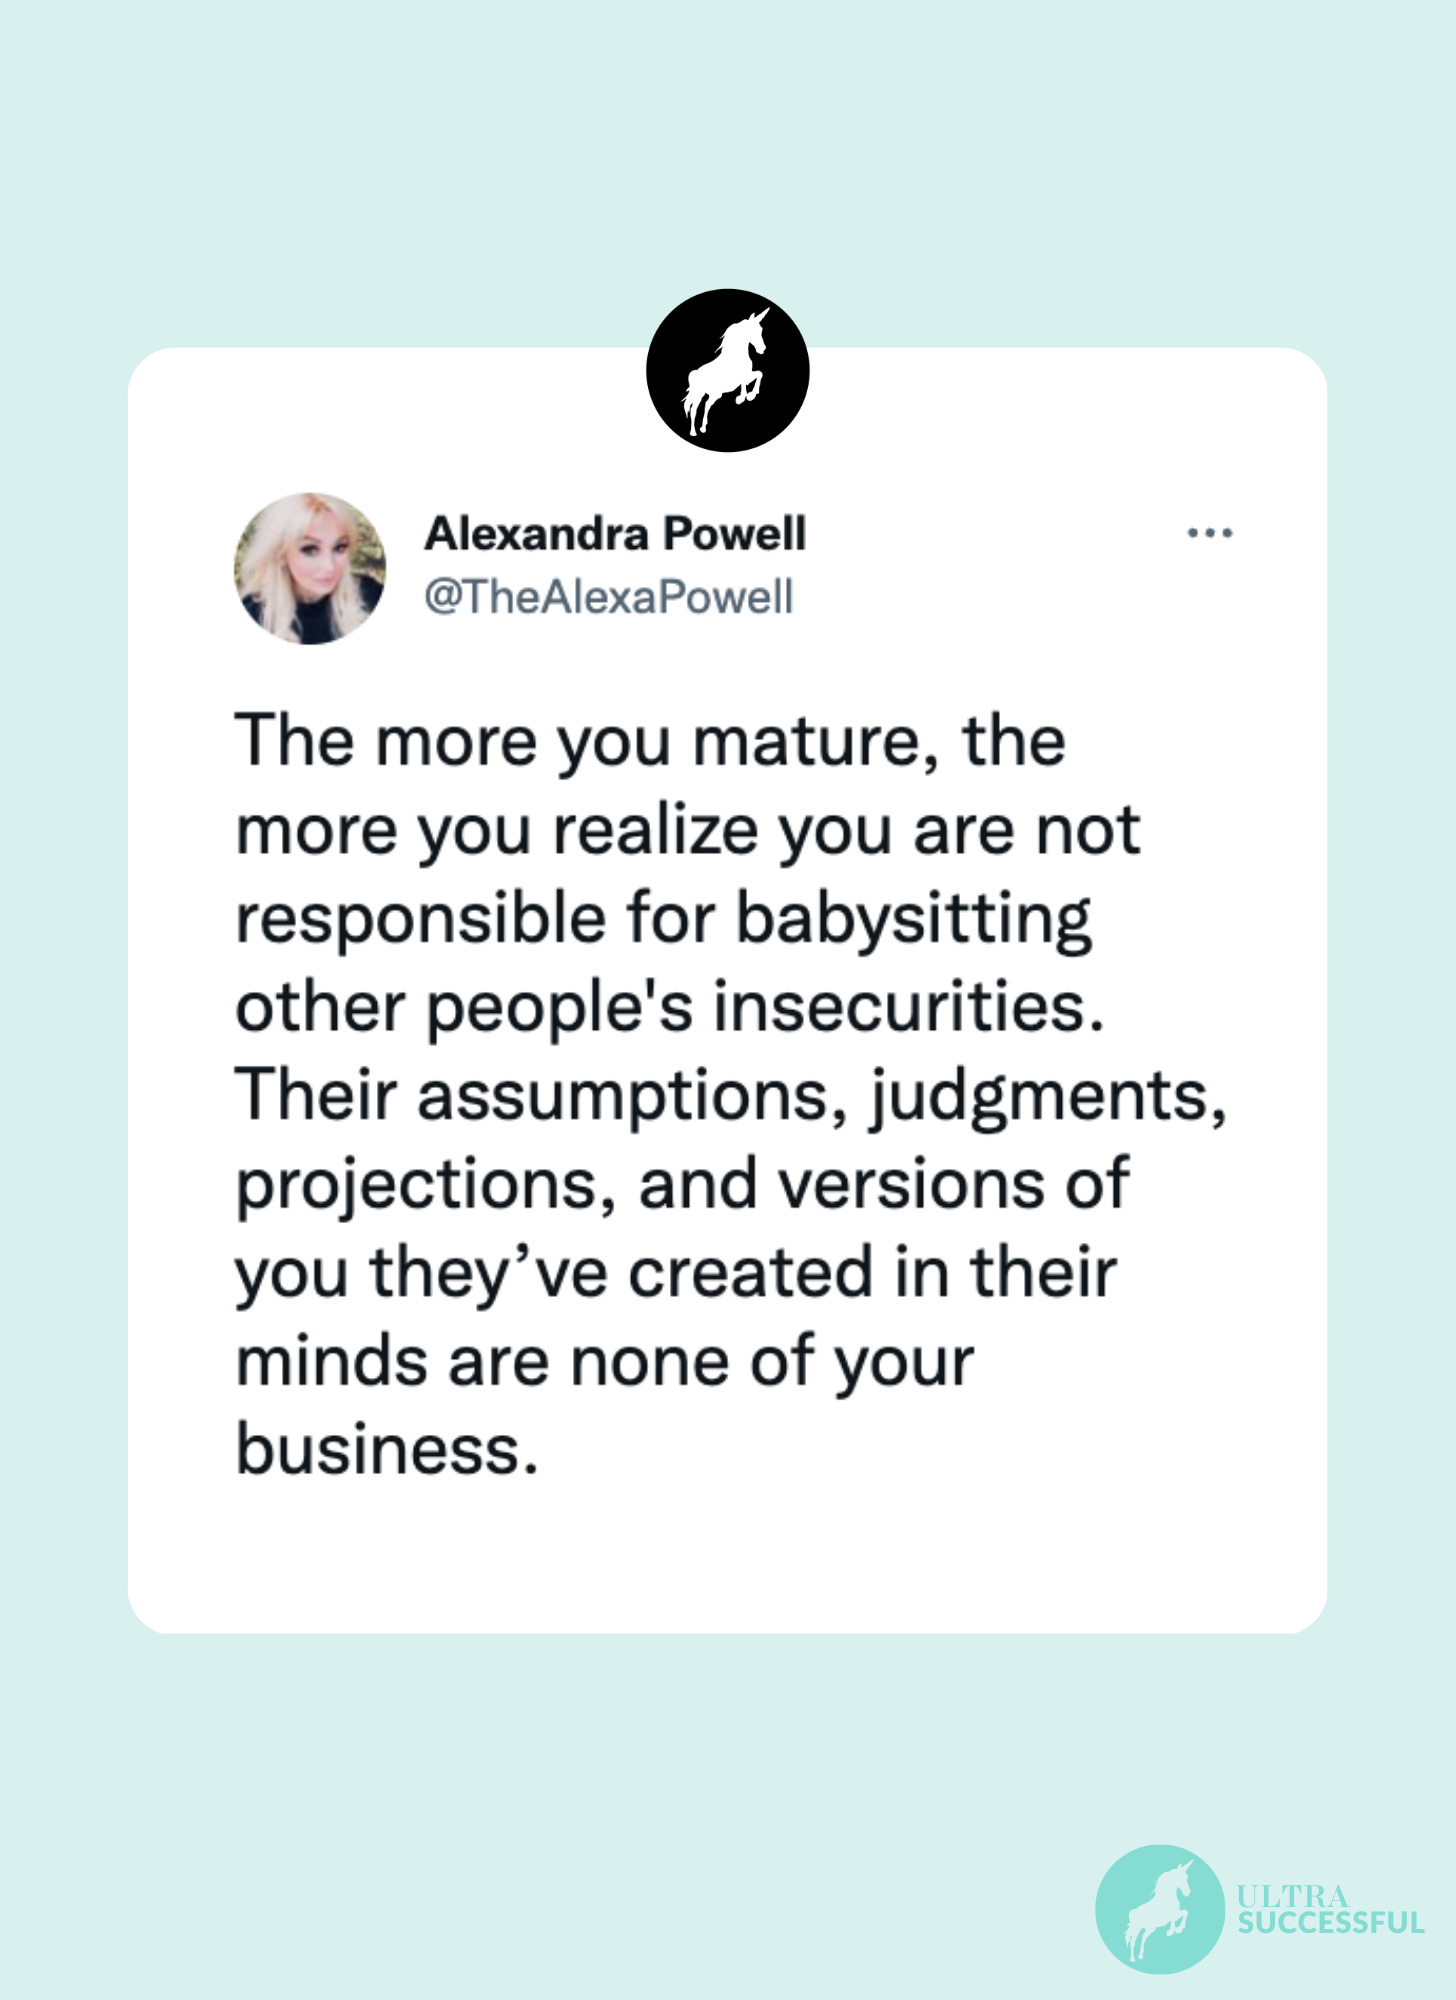 @TheAlexaPowell: The more you mature, the more you realize you are not responsible for babysitting other people's insecurities. Their assumptions, judgments, projections, and versions of you they’ve created in their minds are none of your business.